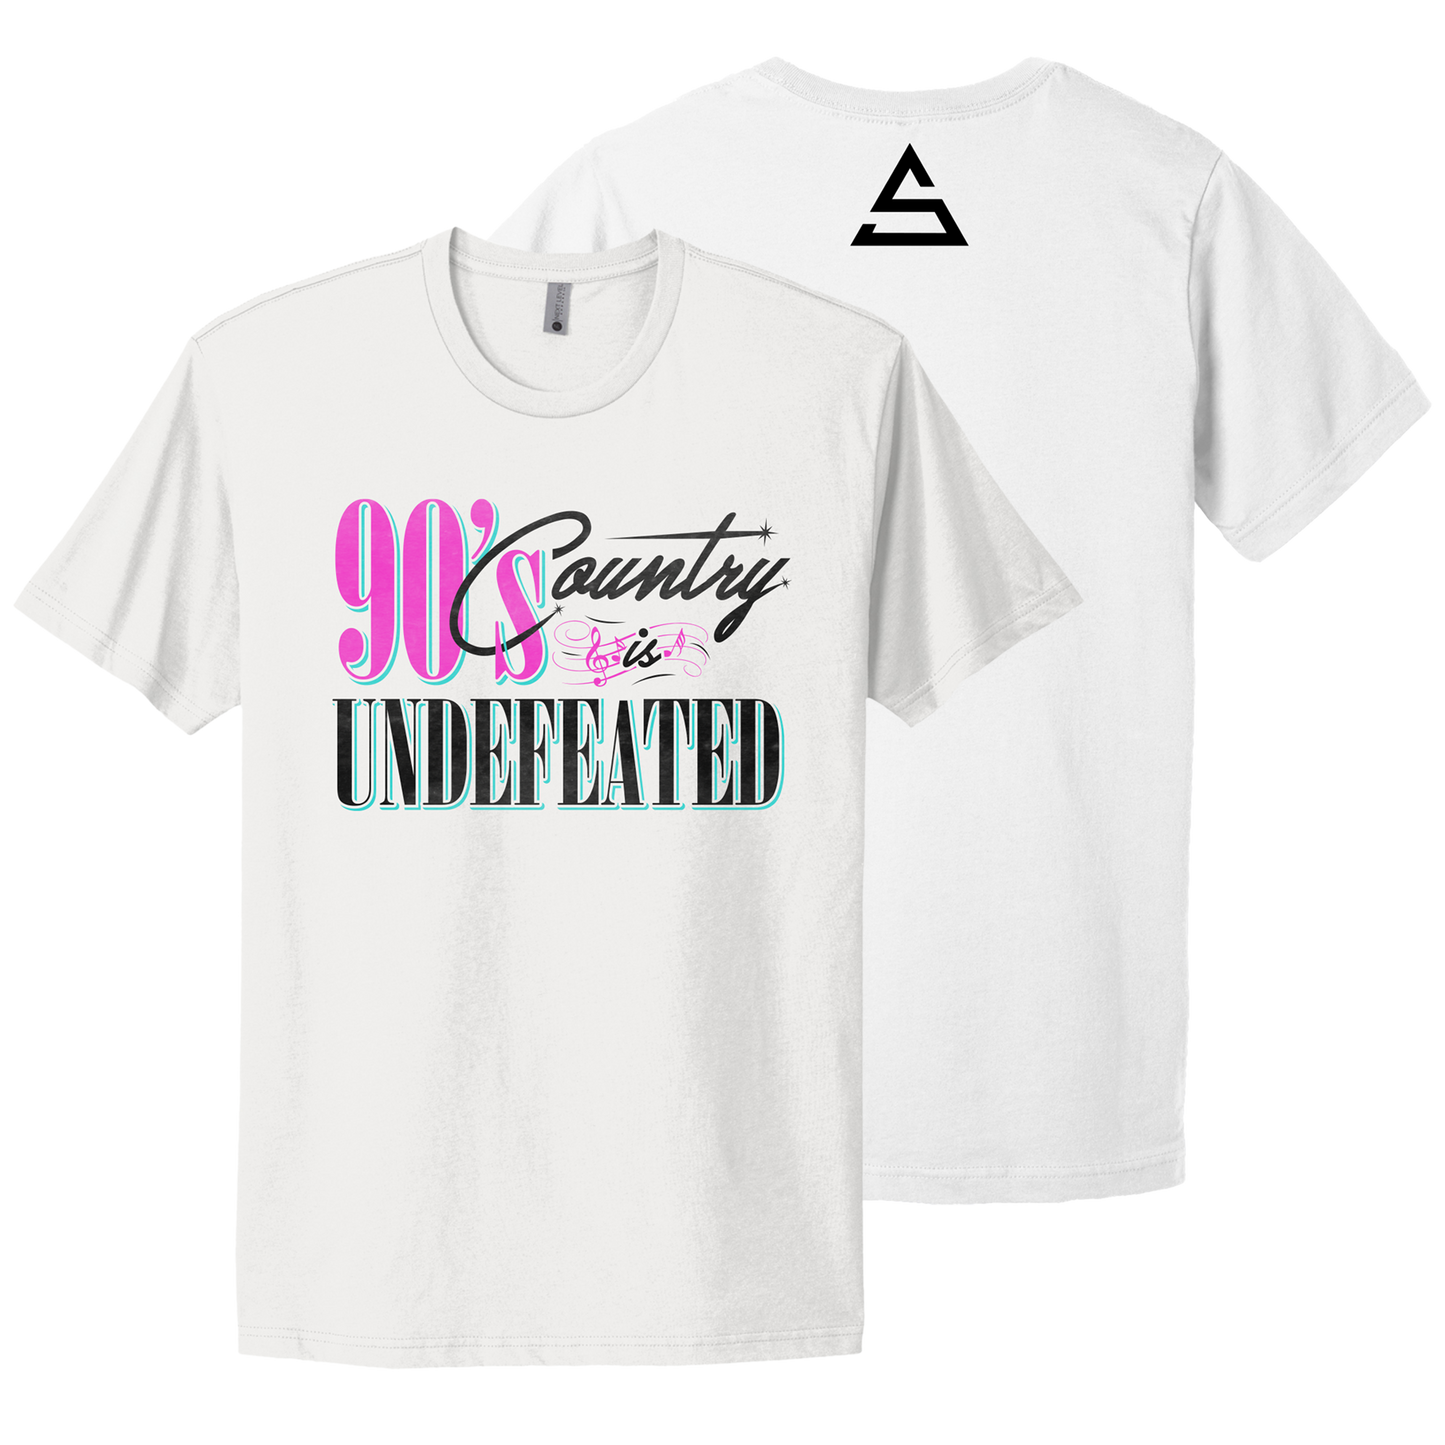 Adam Sanders 90's Country is Undefeated Tee